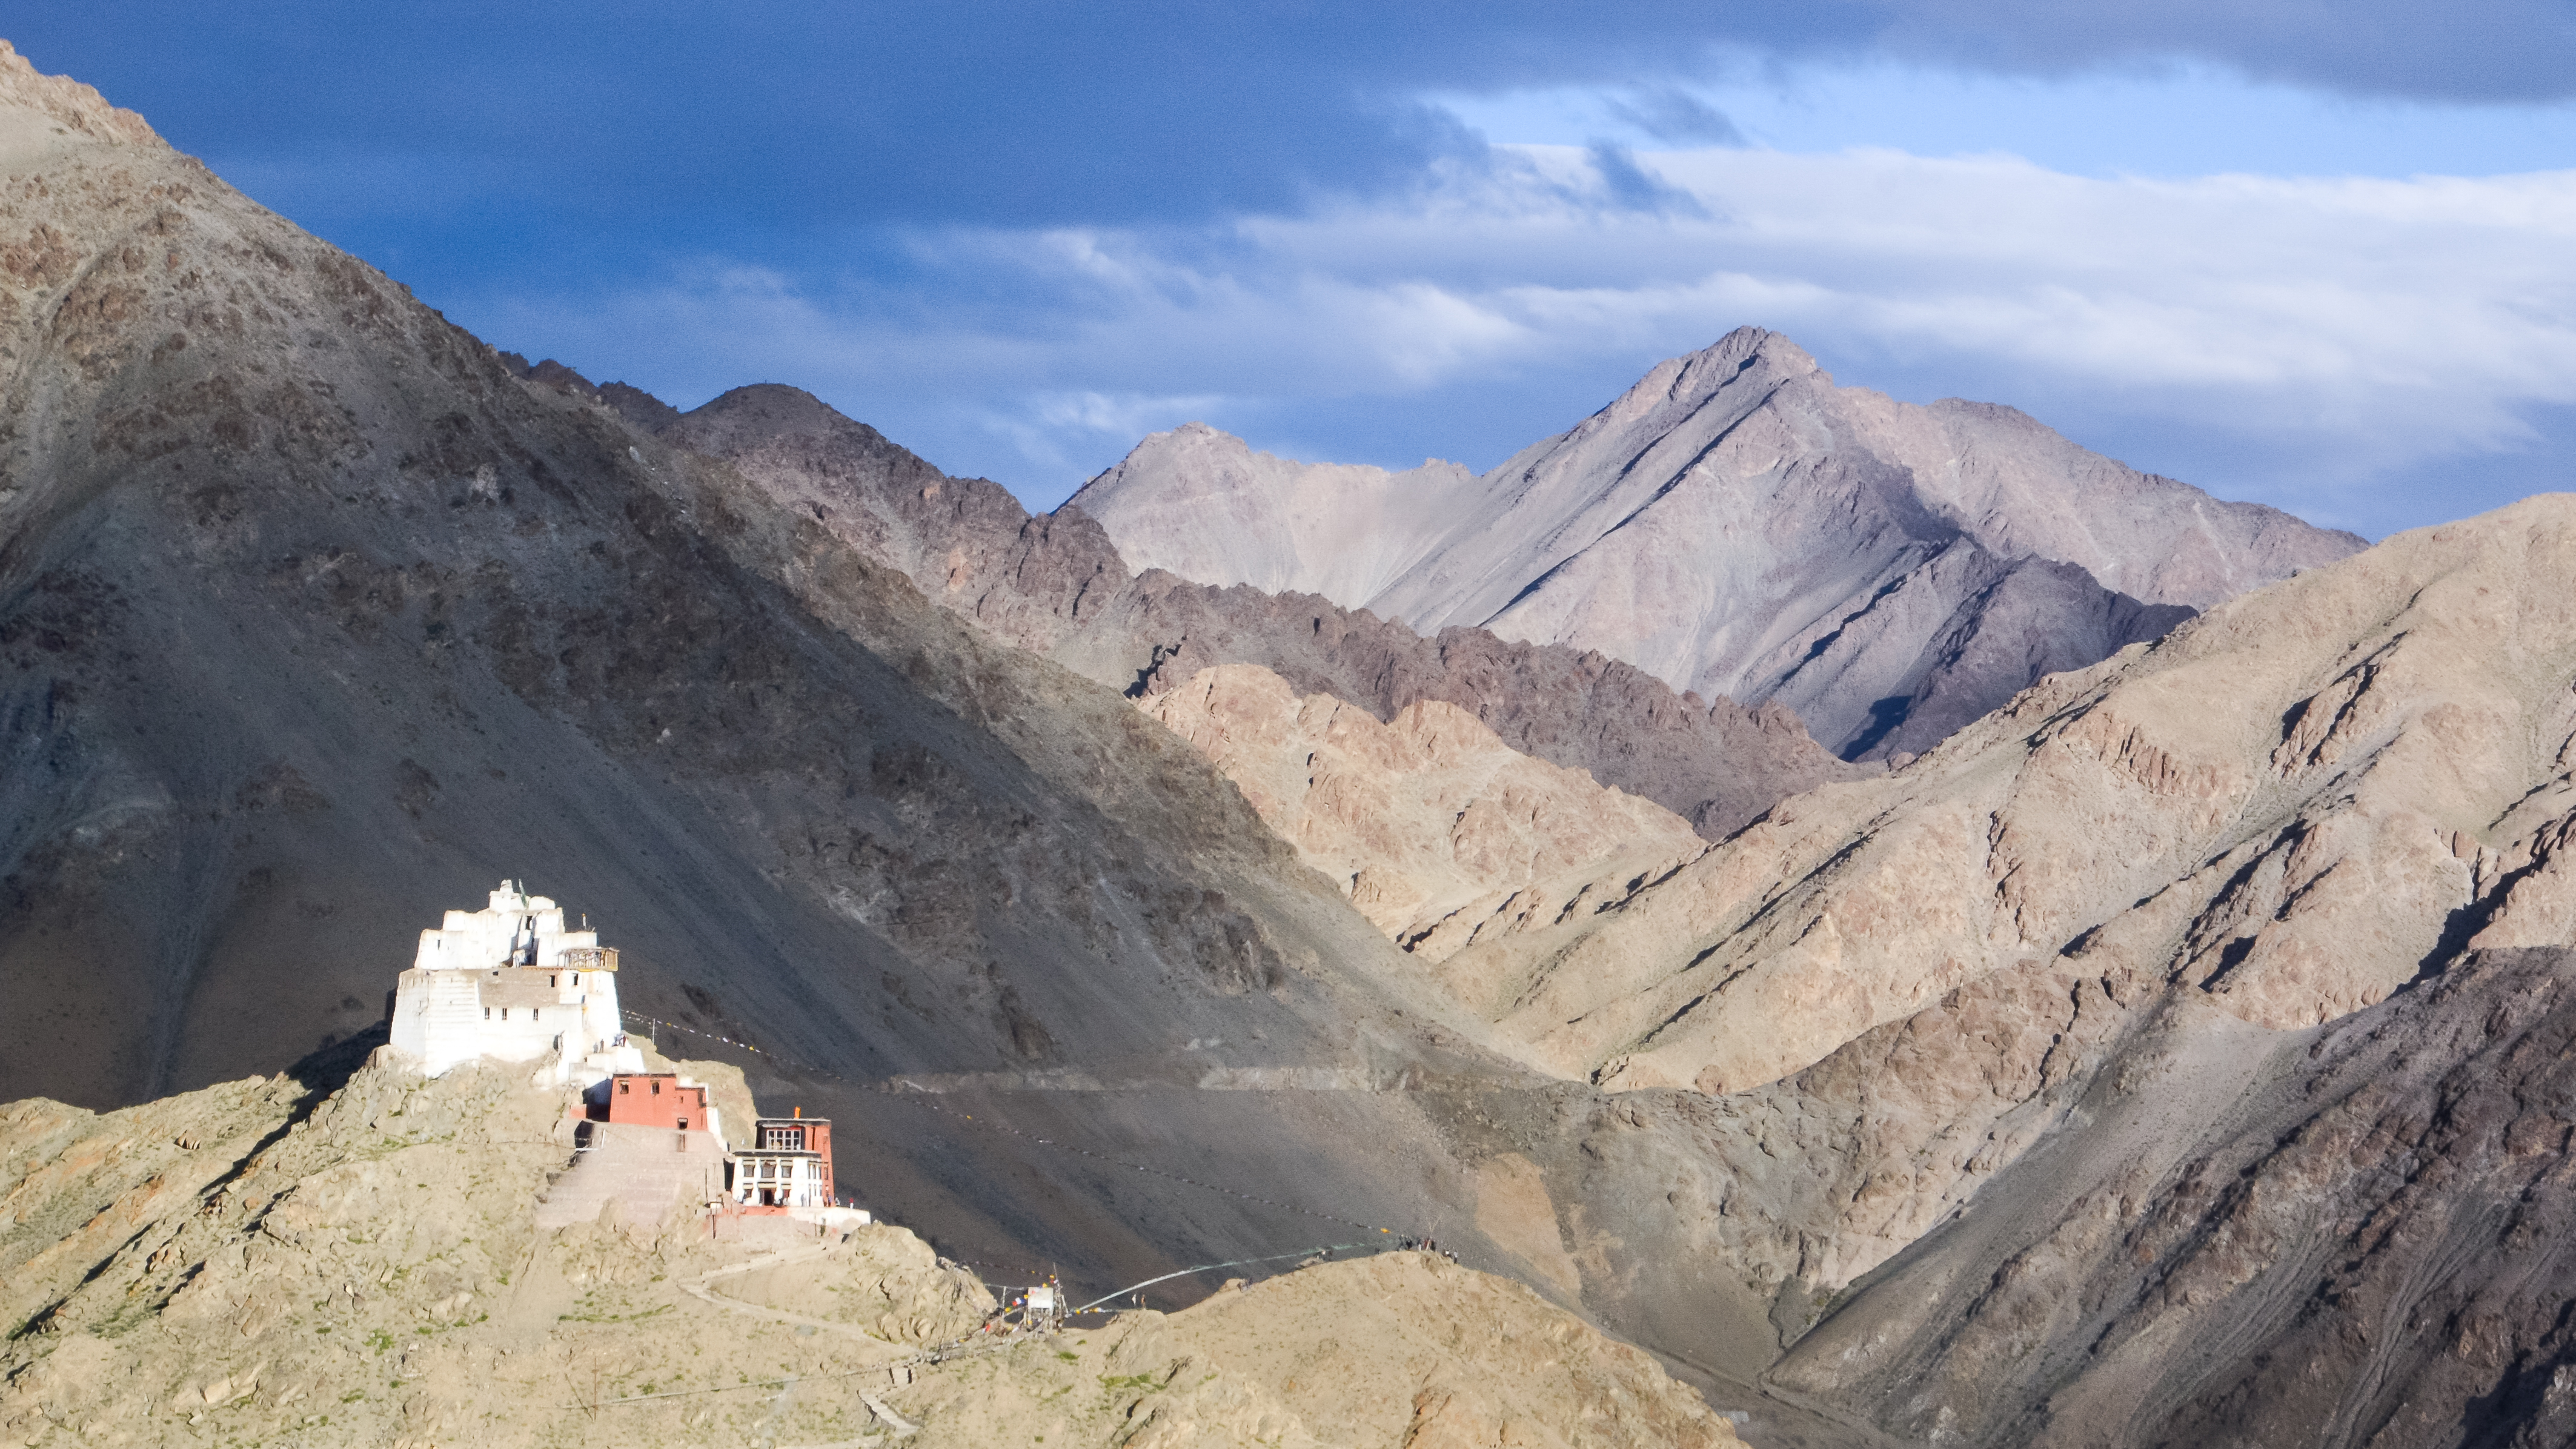 Himalayan peaks and ancient temples, Ladakh, India.